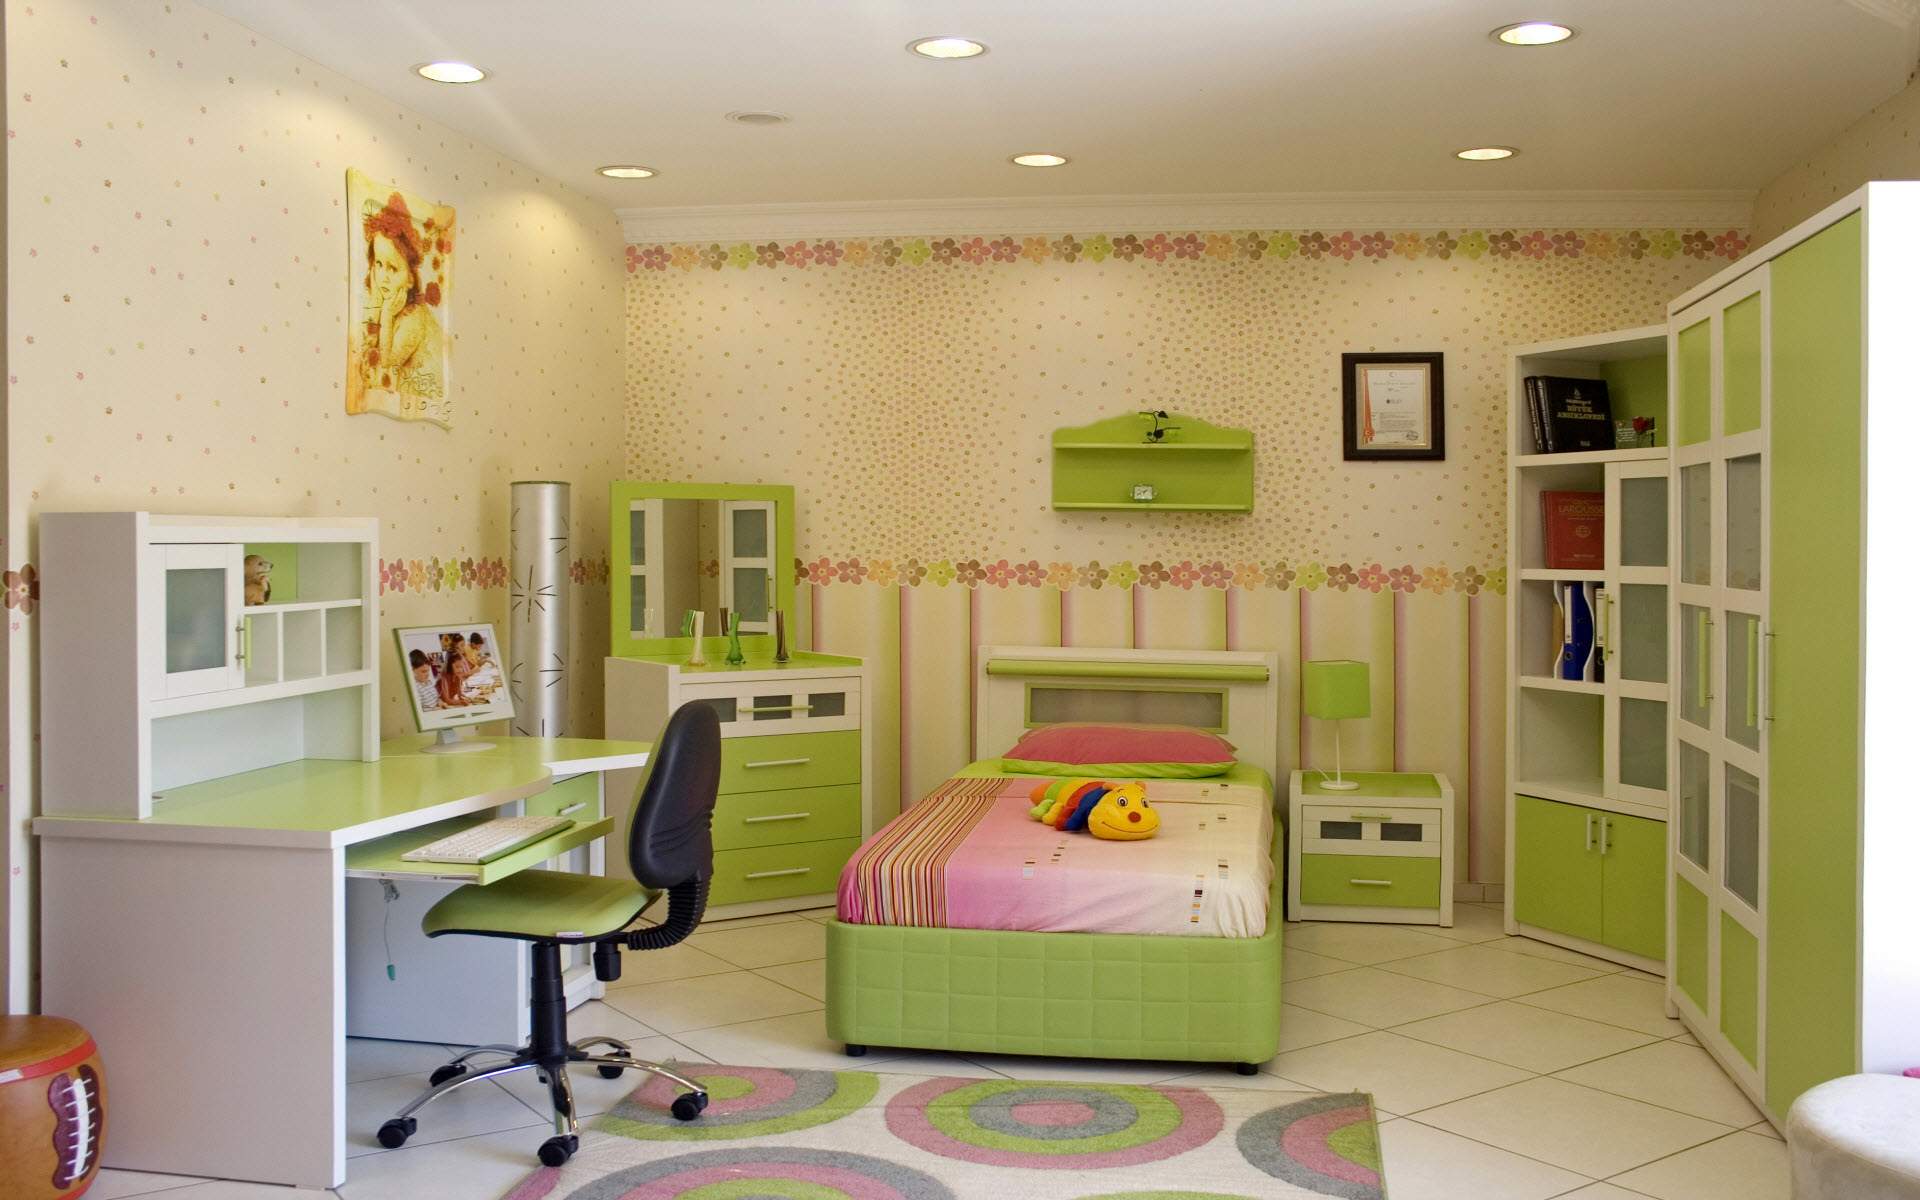 Green Furnitures Room Fascinating Green Furniture Of Kid Room Ideas With Single Bed And Nightstand Furnished With Drawers And Mirror Also Completed With Desk And Pedestal Chair Kids Room 15 Trendy Kids Room Ideas For The Bold Modern Home